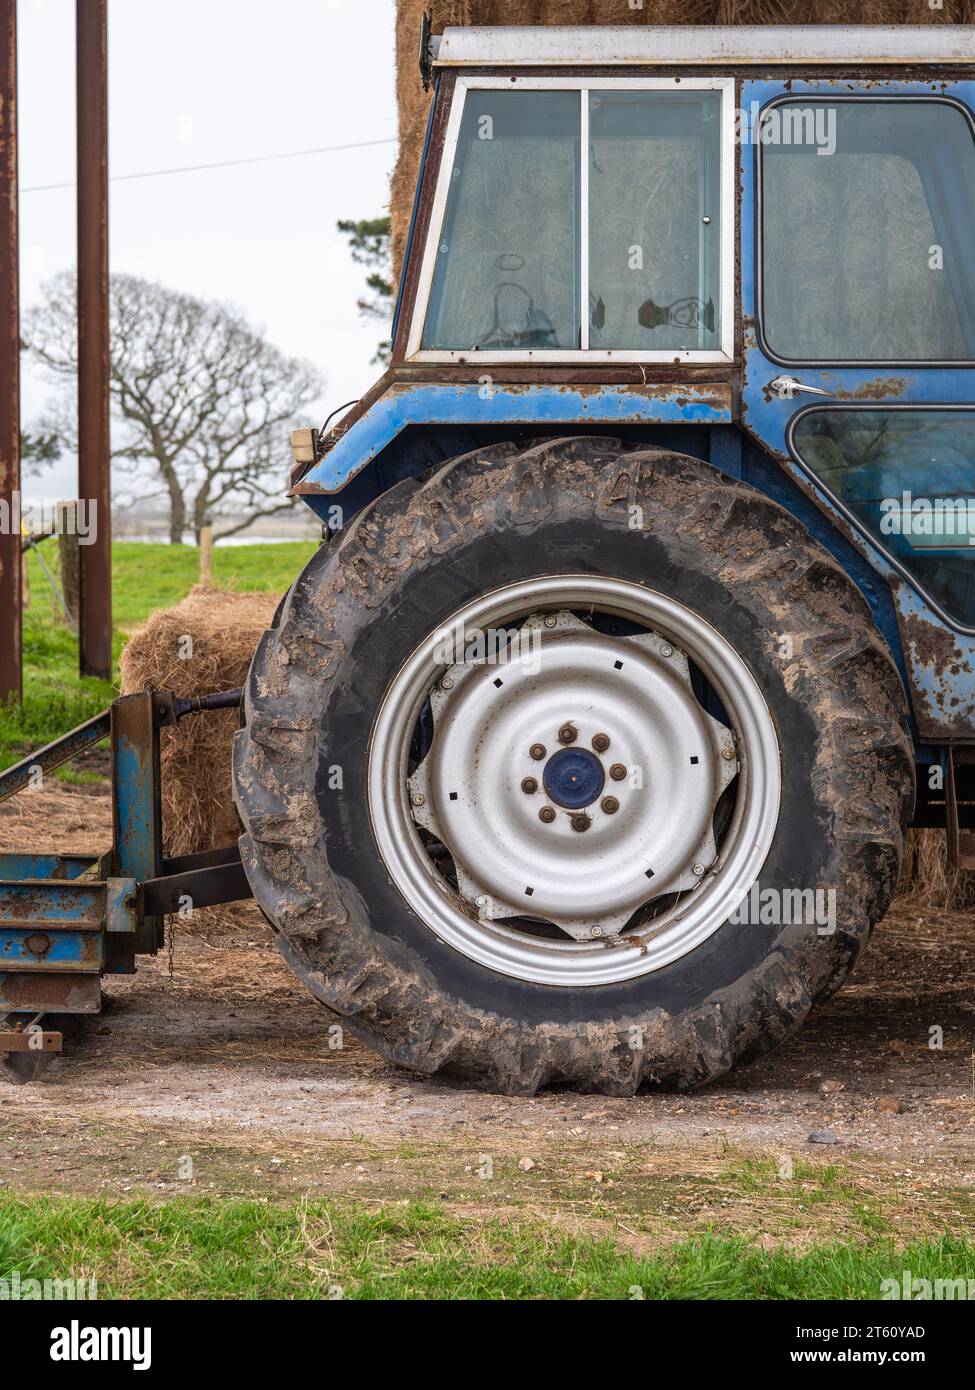 A old vintage leyland 272 tractor in blue, close up of the rear wheel Stock Photo